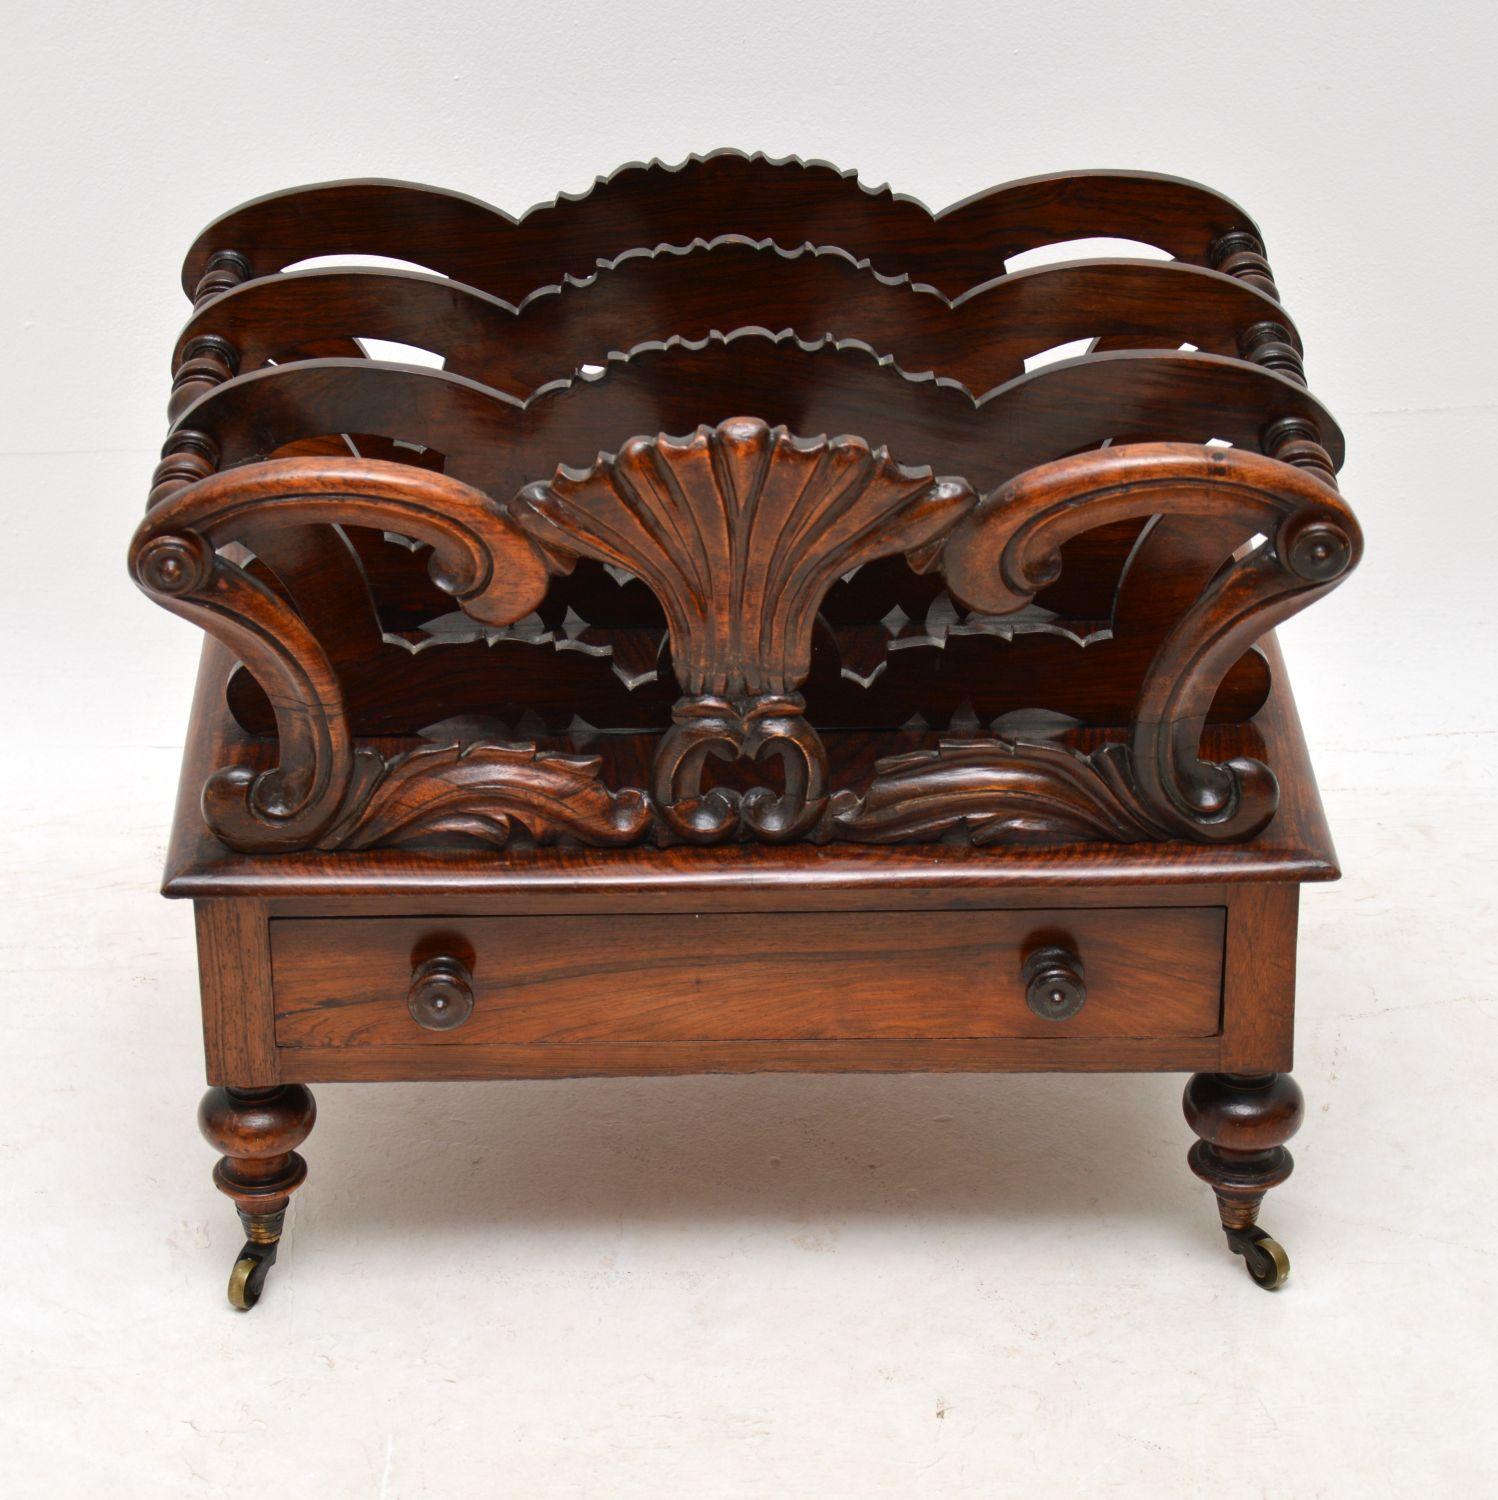 Antique William IV Canterbury in good original condition and dating to circa 1830s-1840s period.

This is a very useful and top quality item, that’s perfect for holding magazines. It’s beautifully carved on the front and there are four partitions.